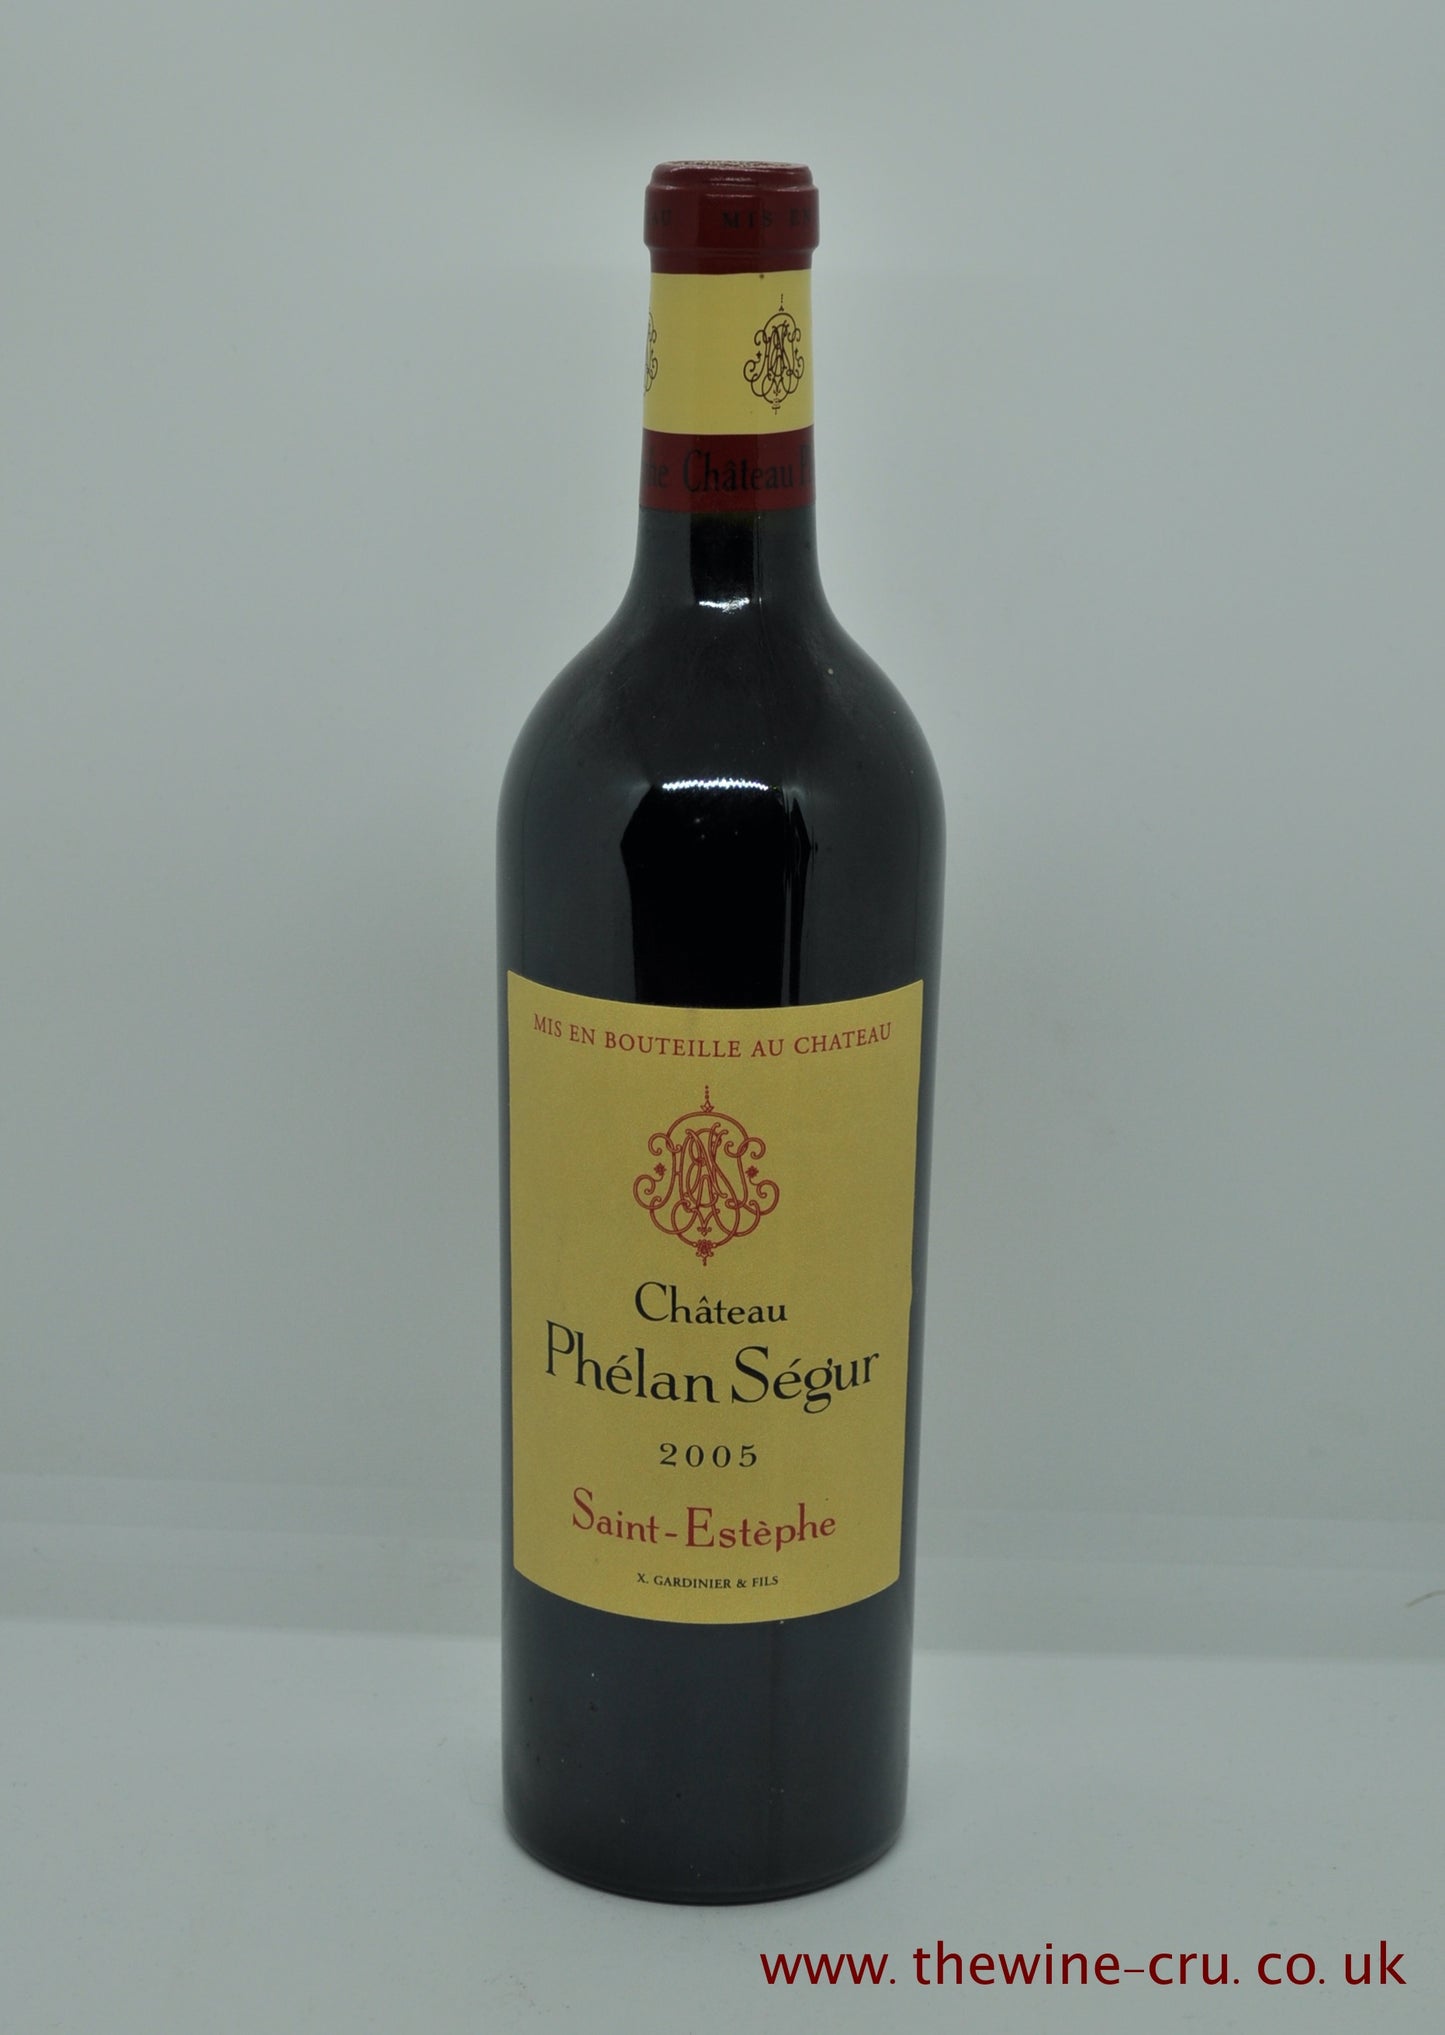 A bottle of 2005 vintage red wine from Chateau Phelan Segur, France, Bordeaux, Saint Estephe. The bottle is in excellent condition. Immediate delivery. Free local delivery. Gift wrapping available.